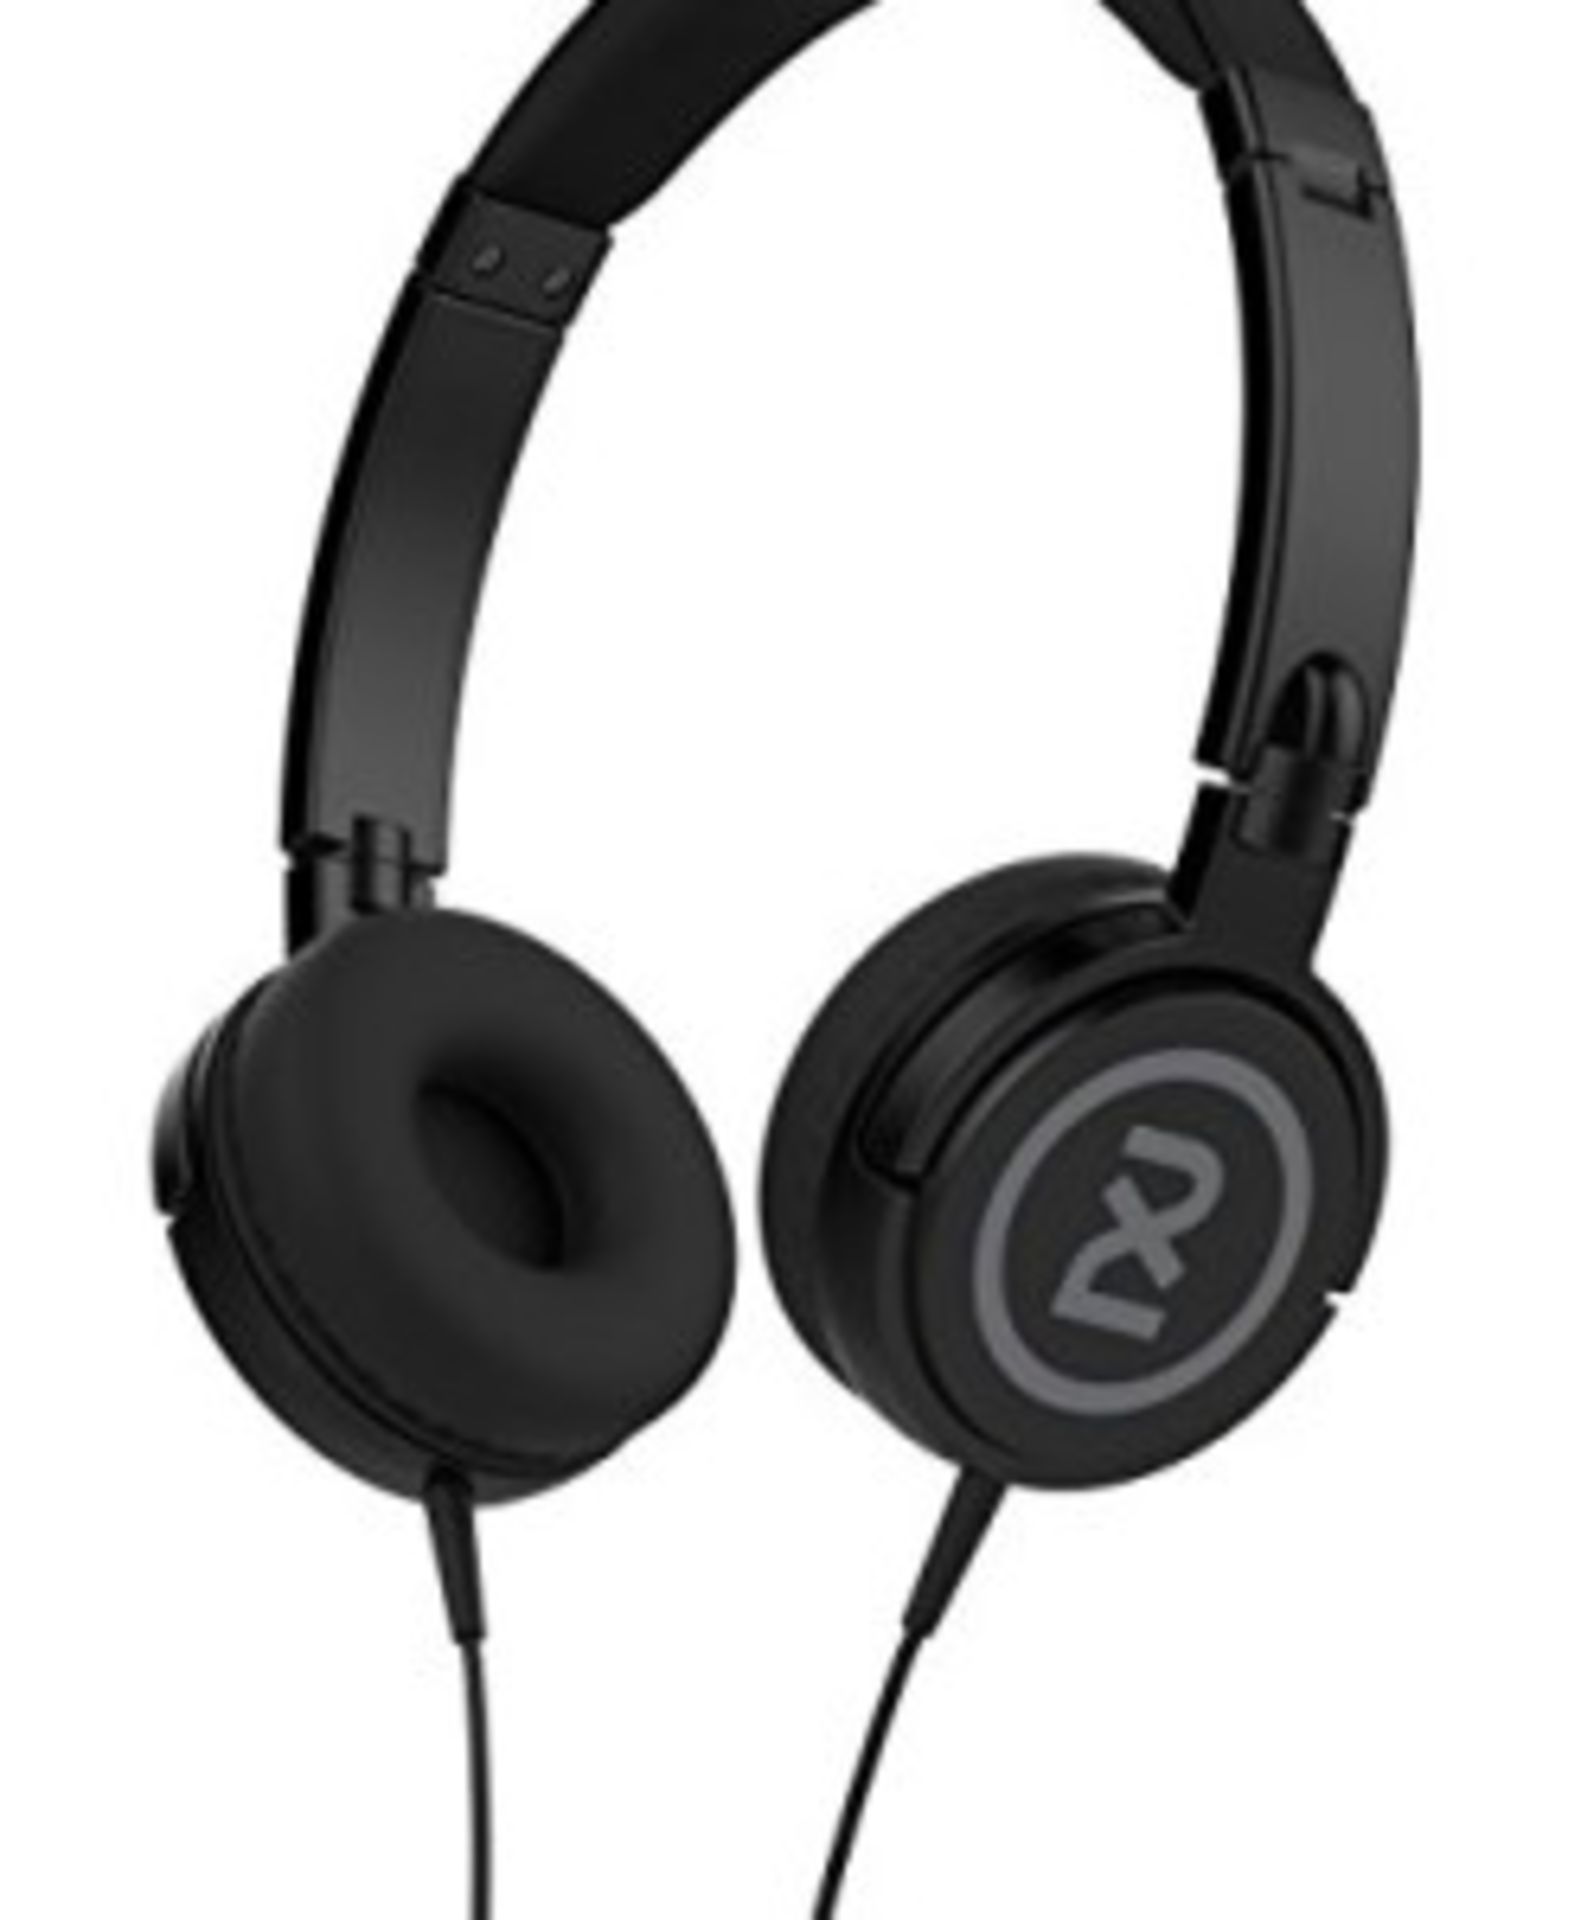 V *TRADE QTY* Brand New Skullcandy 2XL Shakedown Headphones X 8 YOUR BID PRICE TO BE MULTIPLIED BY